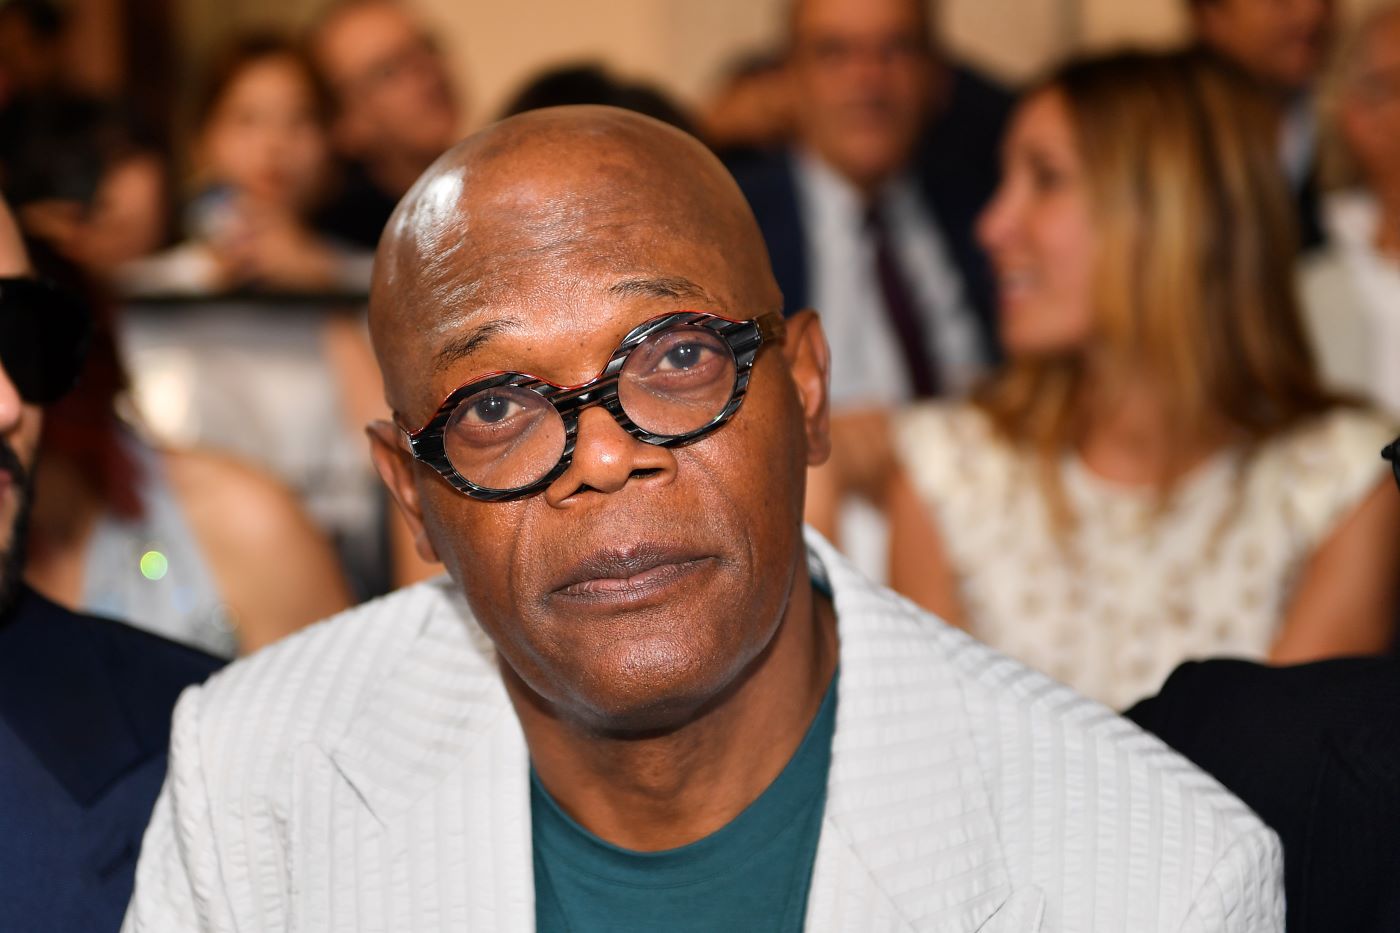 Samuel L. Jackson wearing a textured cream suit jacket with a green undershirt and black rimmed glasses in front of a background of several blurred images of people.